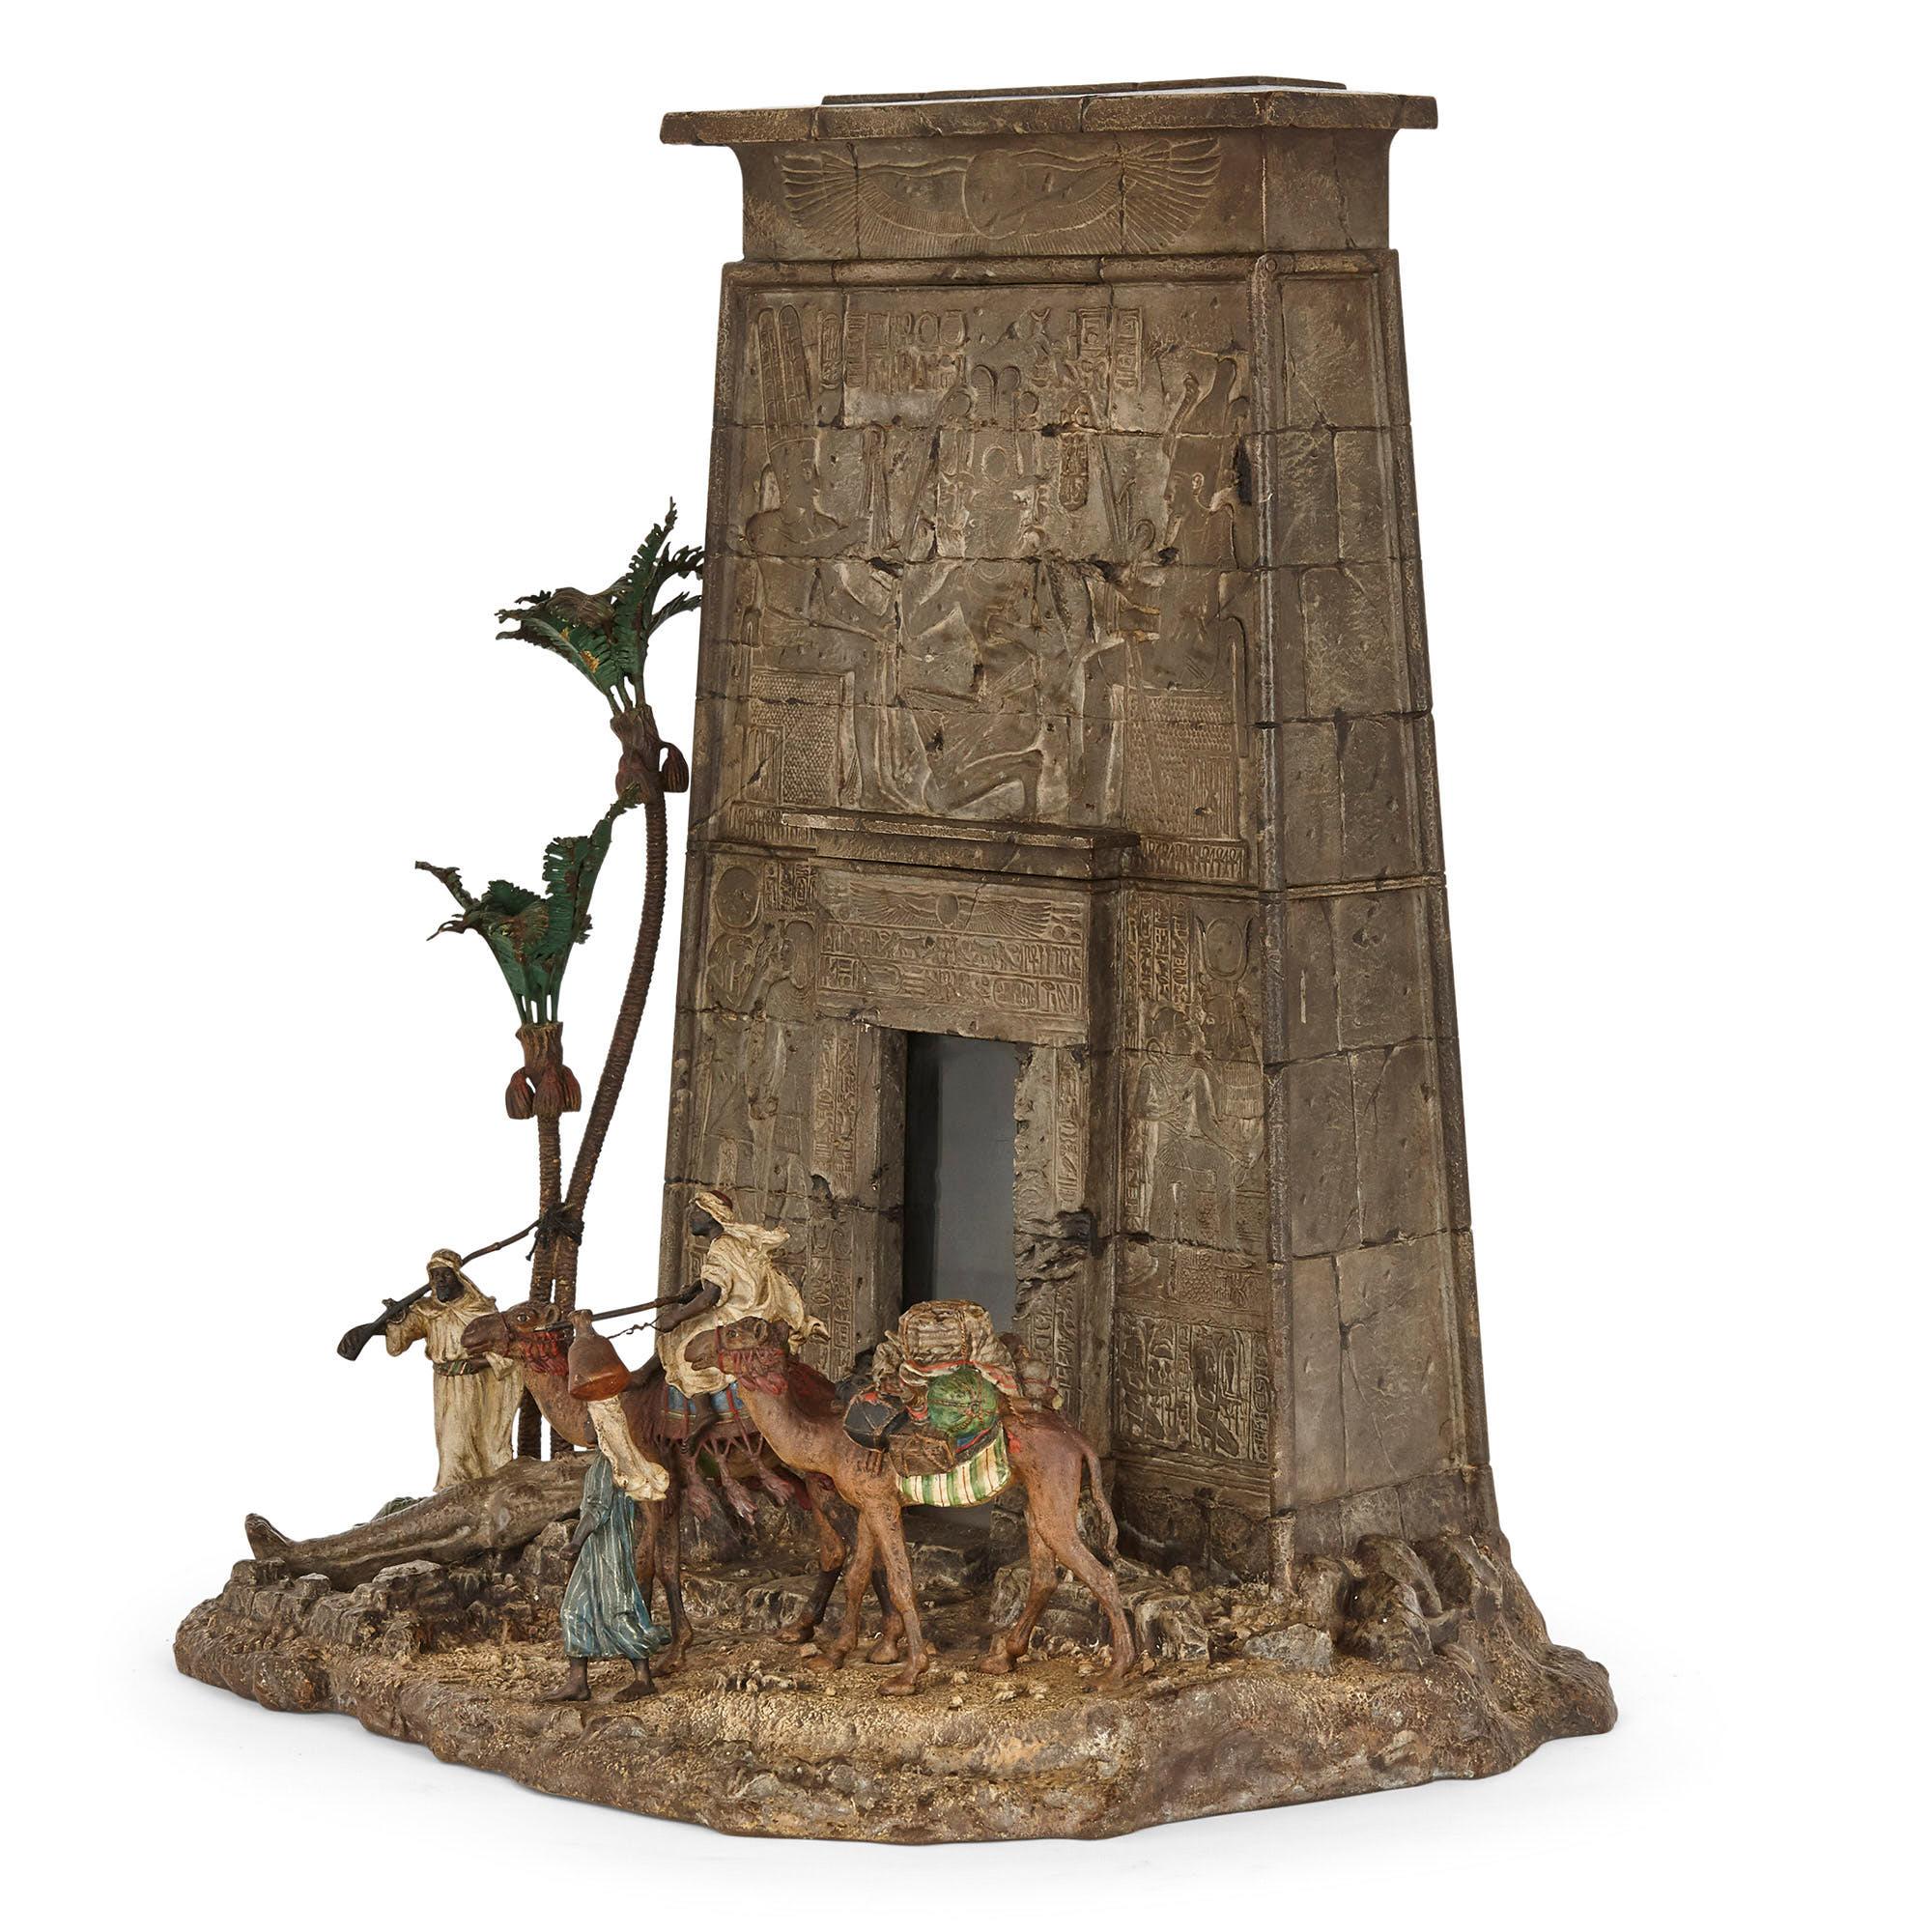 Viennese cold-painted bronze Egyptian monument letterbox by Bergman
Austrian, circa 1900
Measures: Height 46cm, width 39cm, depth 28cm

Demonstrating the very best of Bergman, this wonderful cold-painted bronze sculpture depicts an exotic